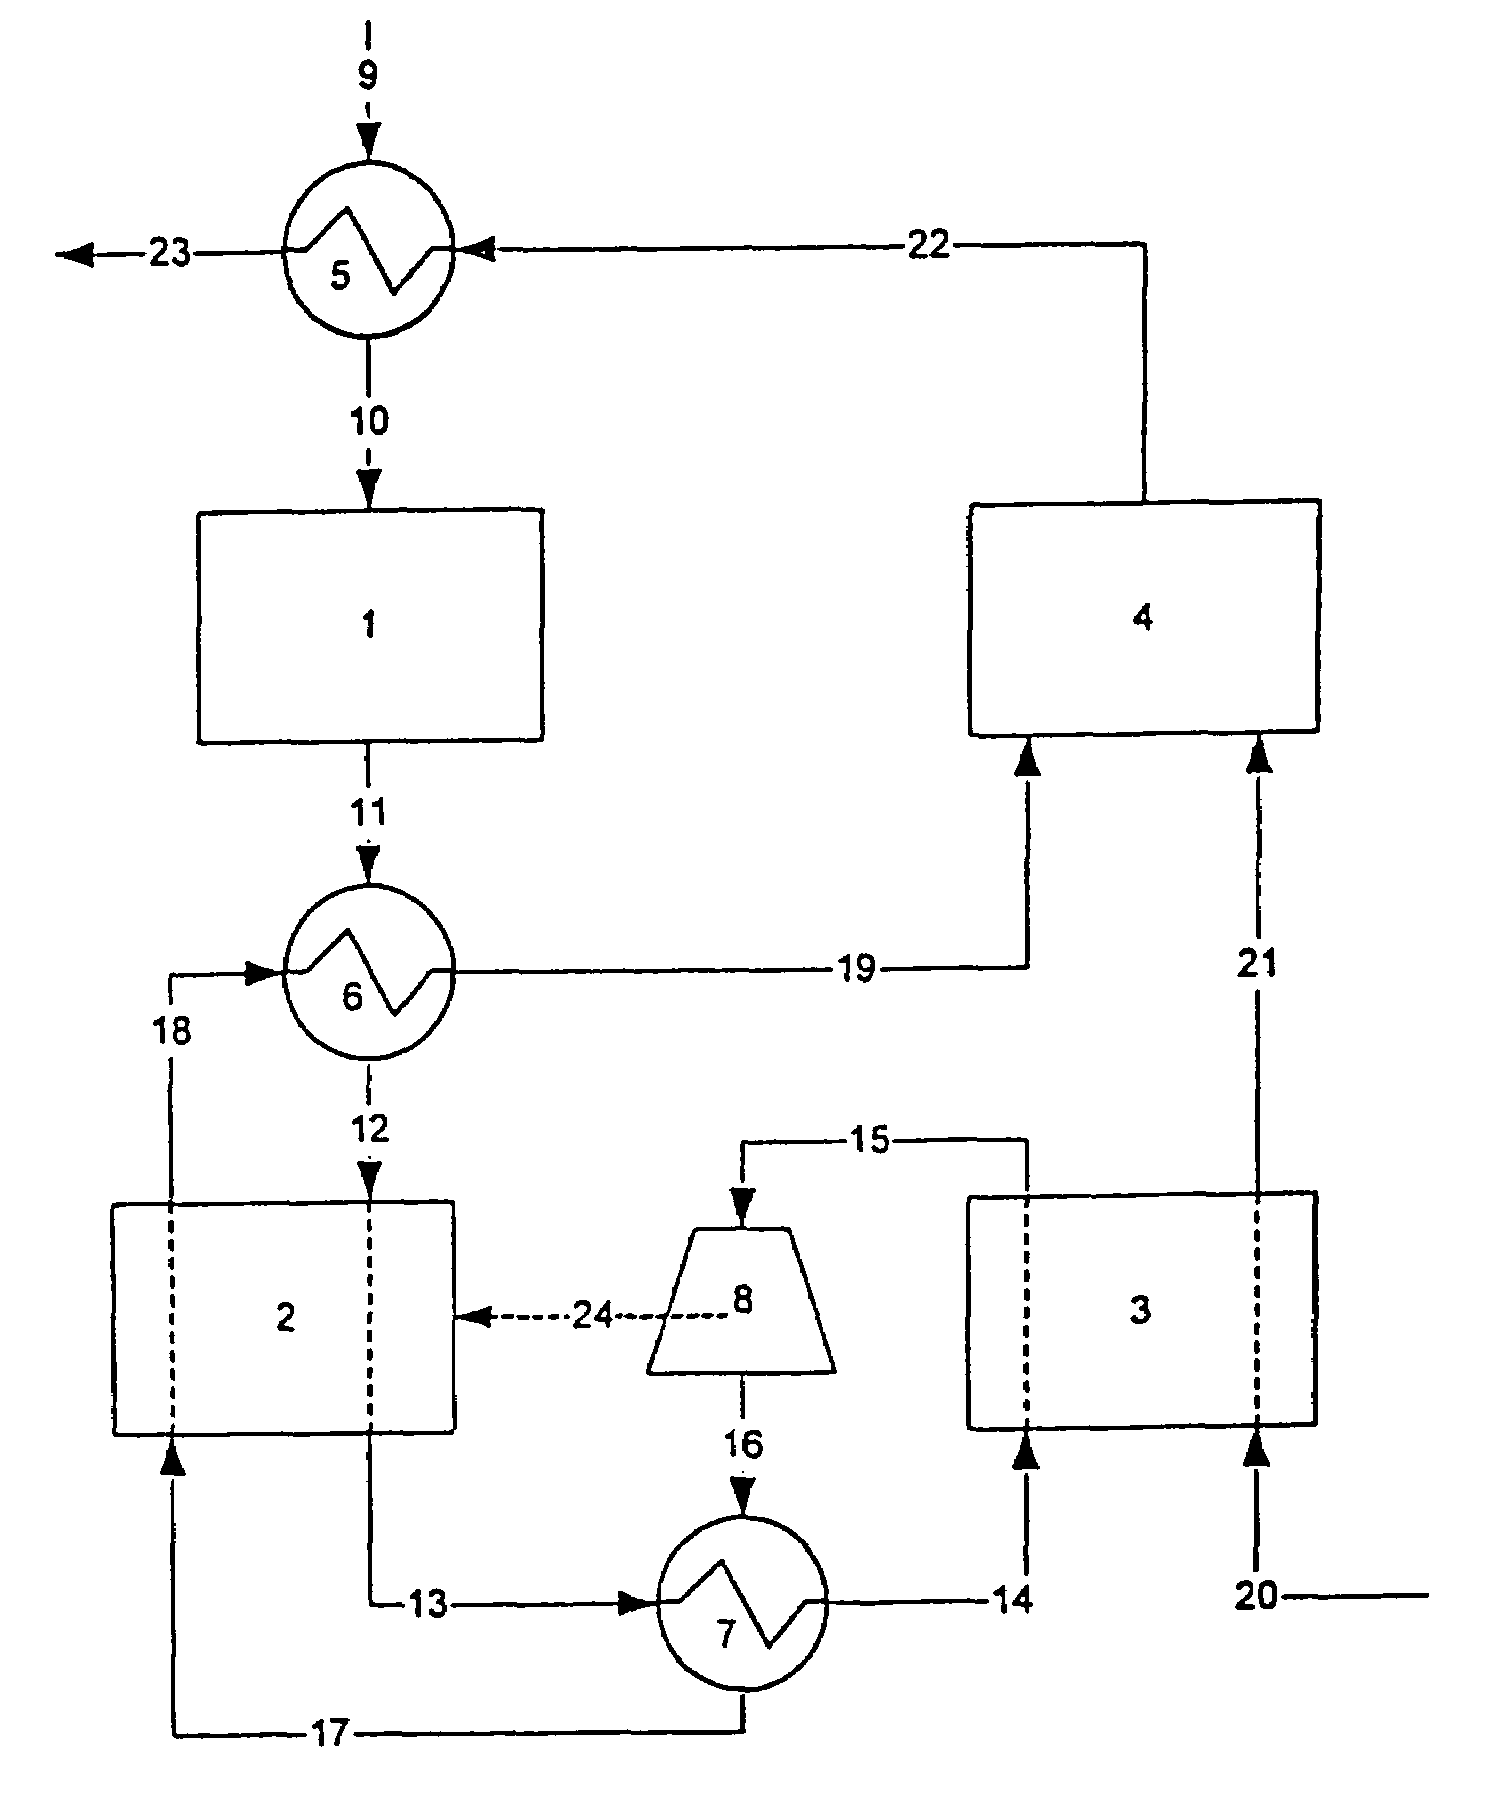 Combined water gas shift reactor/carbon dioxide adsorber for use in a fuel cell system